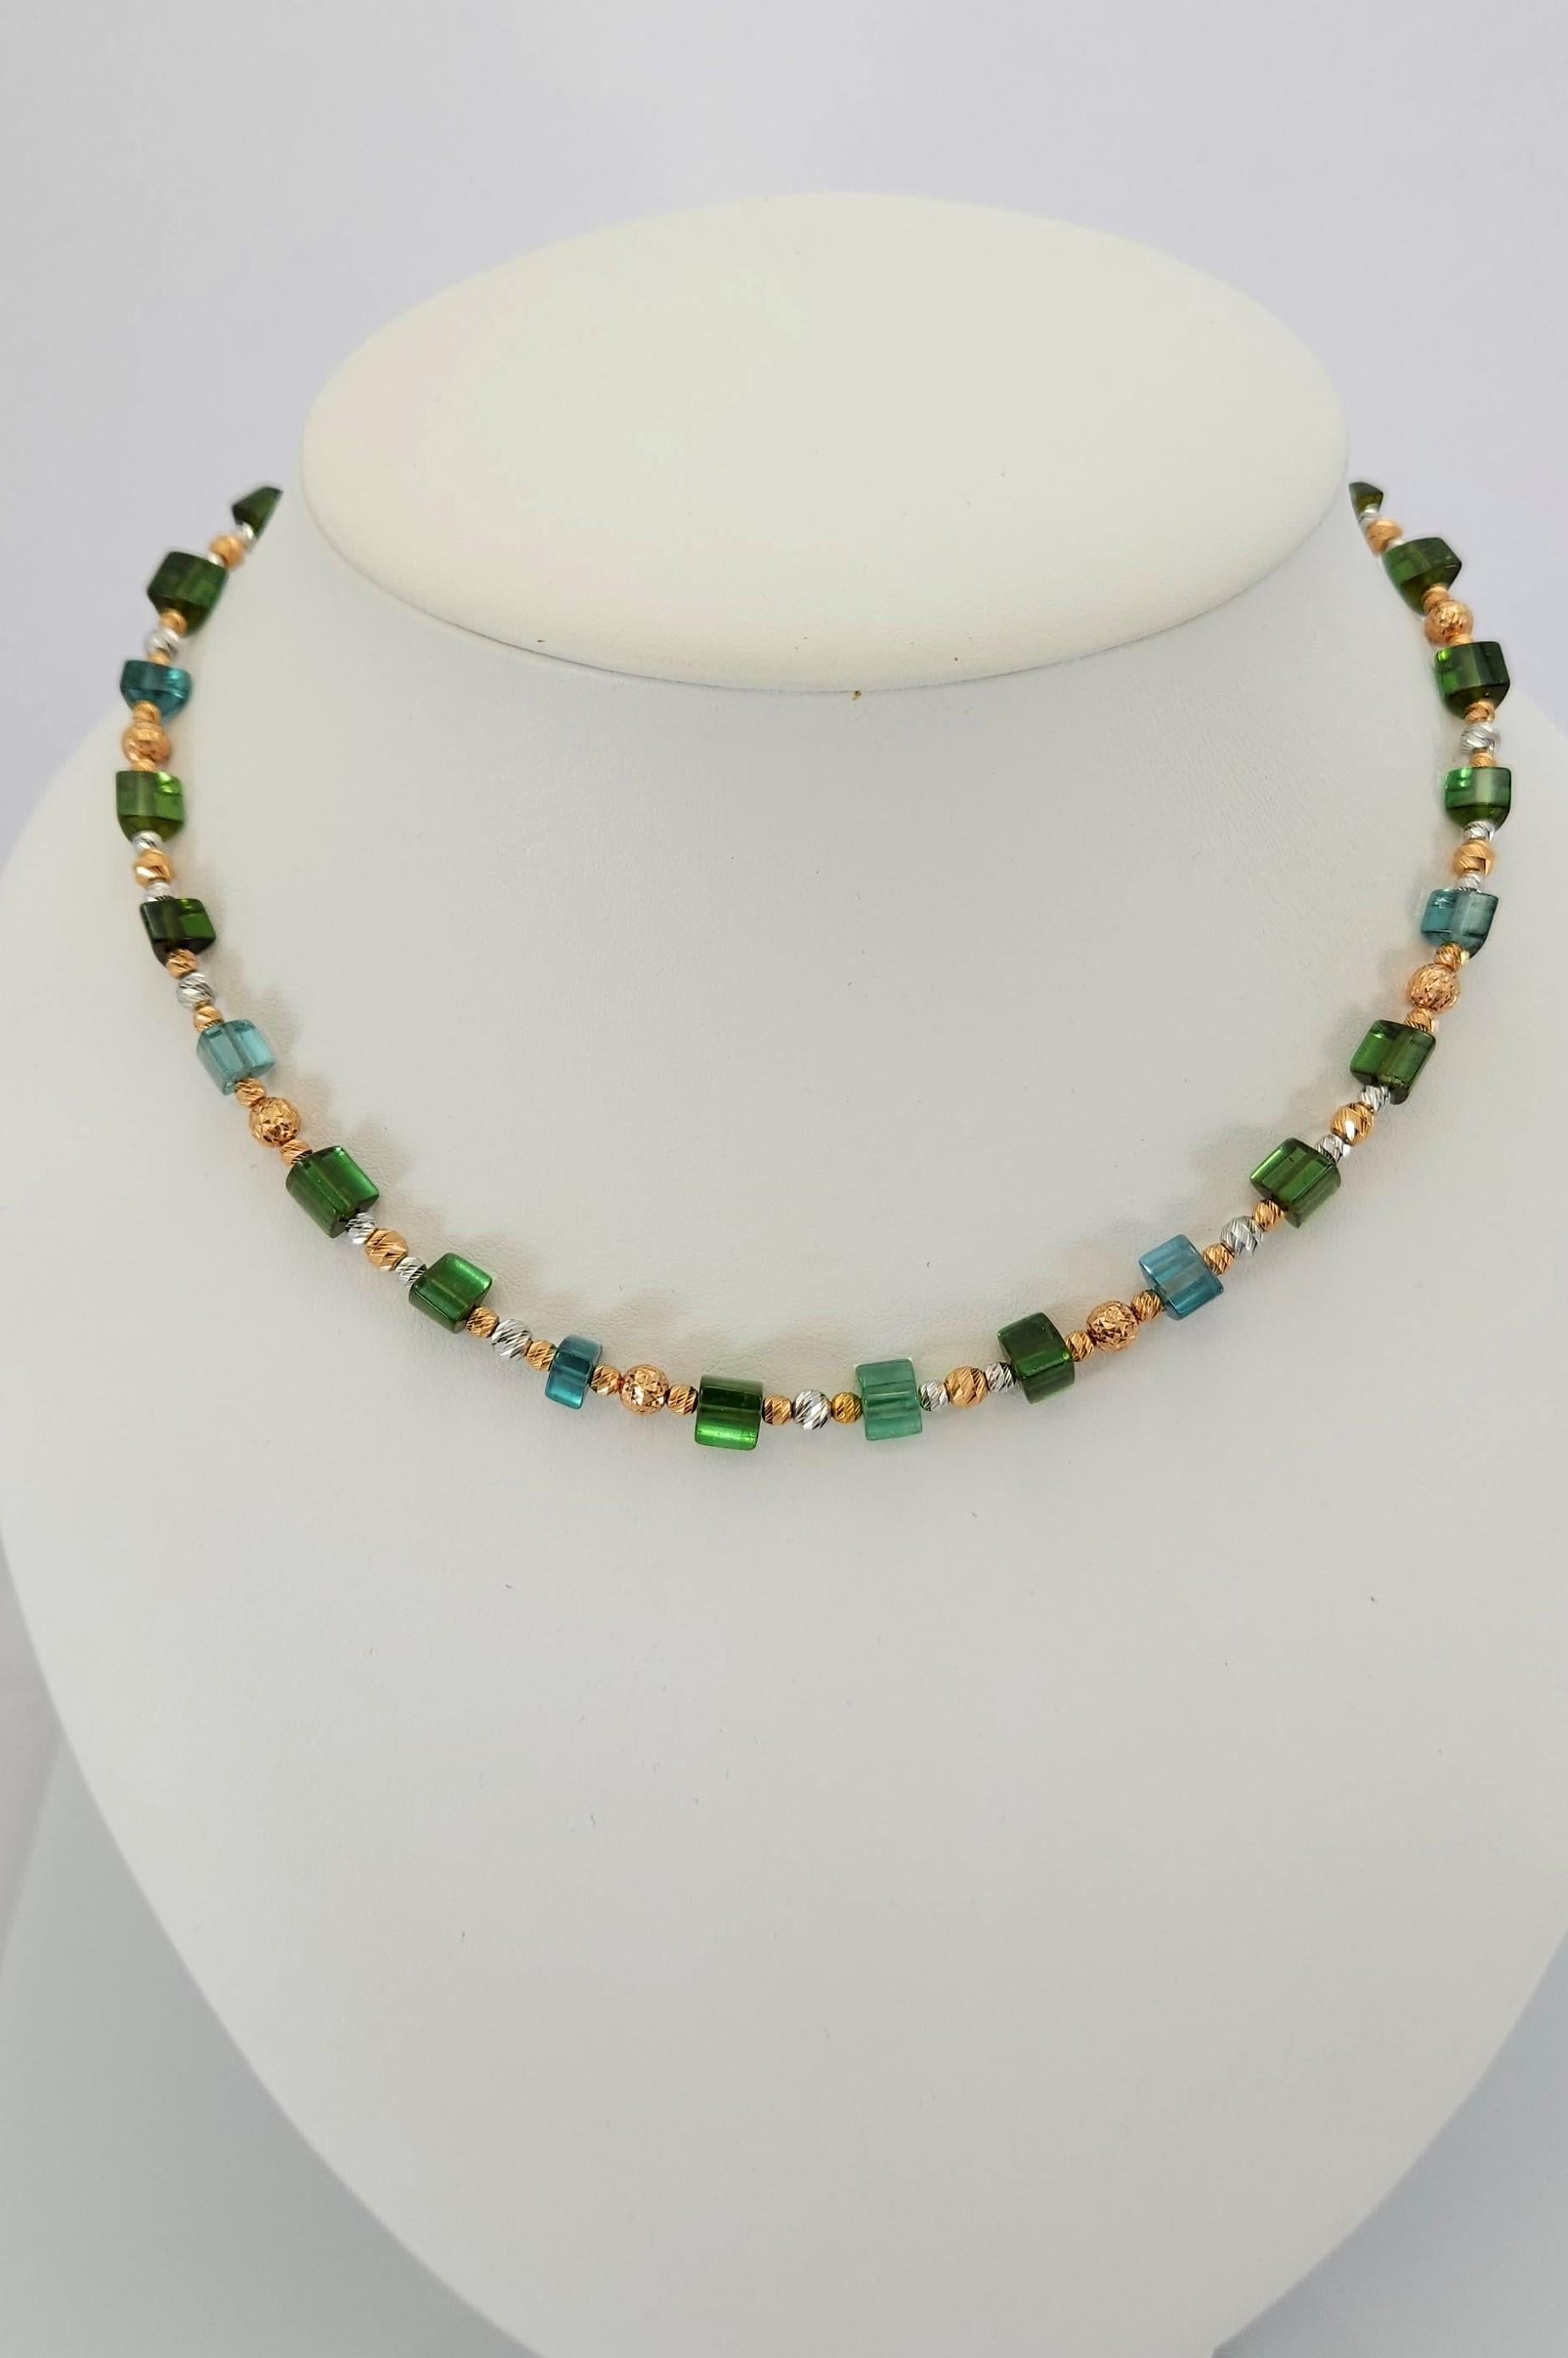 This Natural Green-blue Tourmaline Crystal Beaded Necklace with 18 Carat rose and white Gold is handmade.
Cutting as well as goldwork are made in German quality. The screw clasp is easy to handle and very secure.
Triangular gold clasp matchs